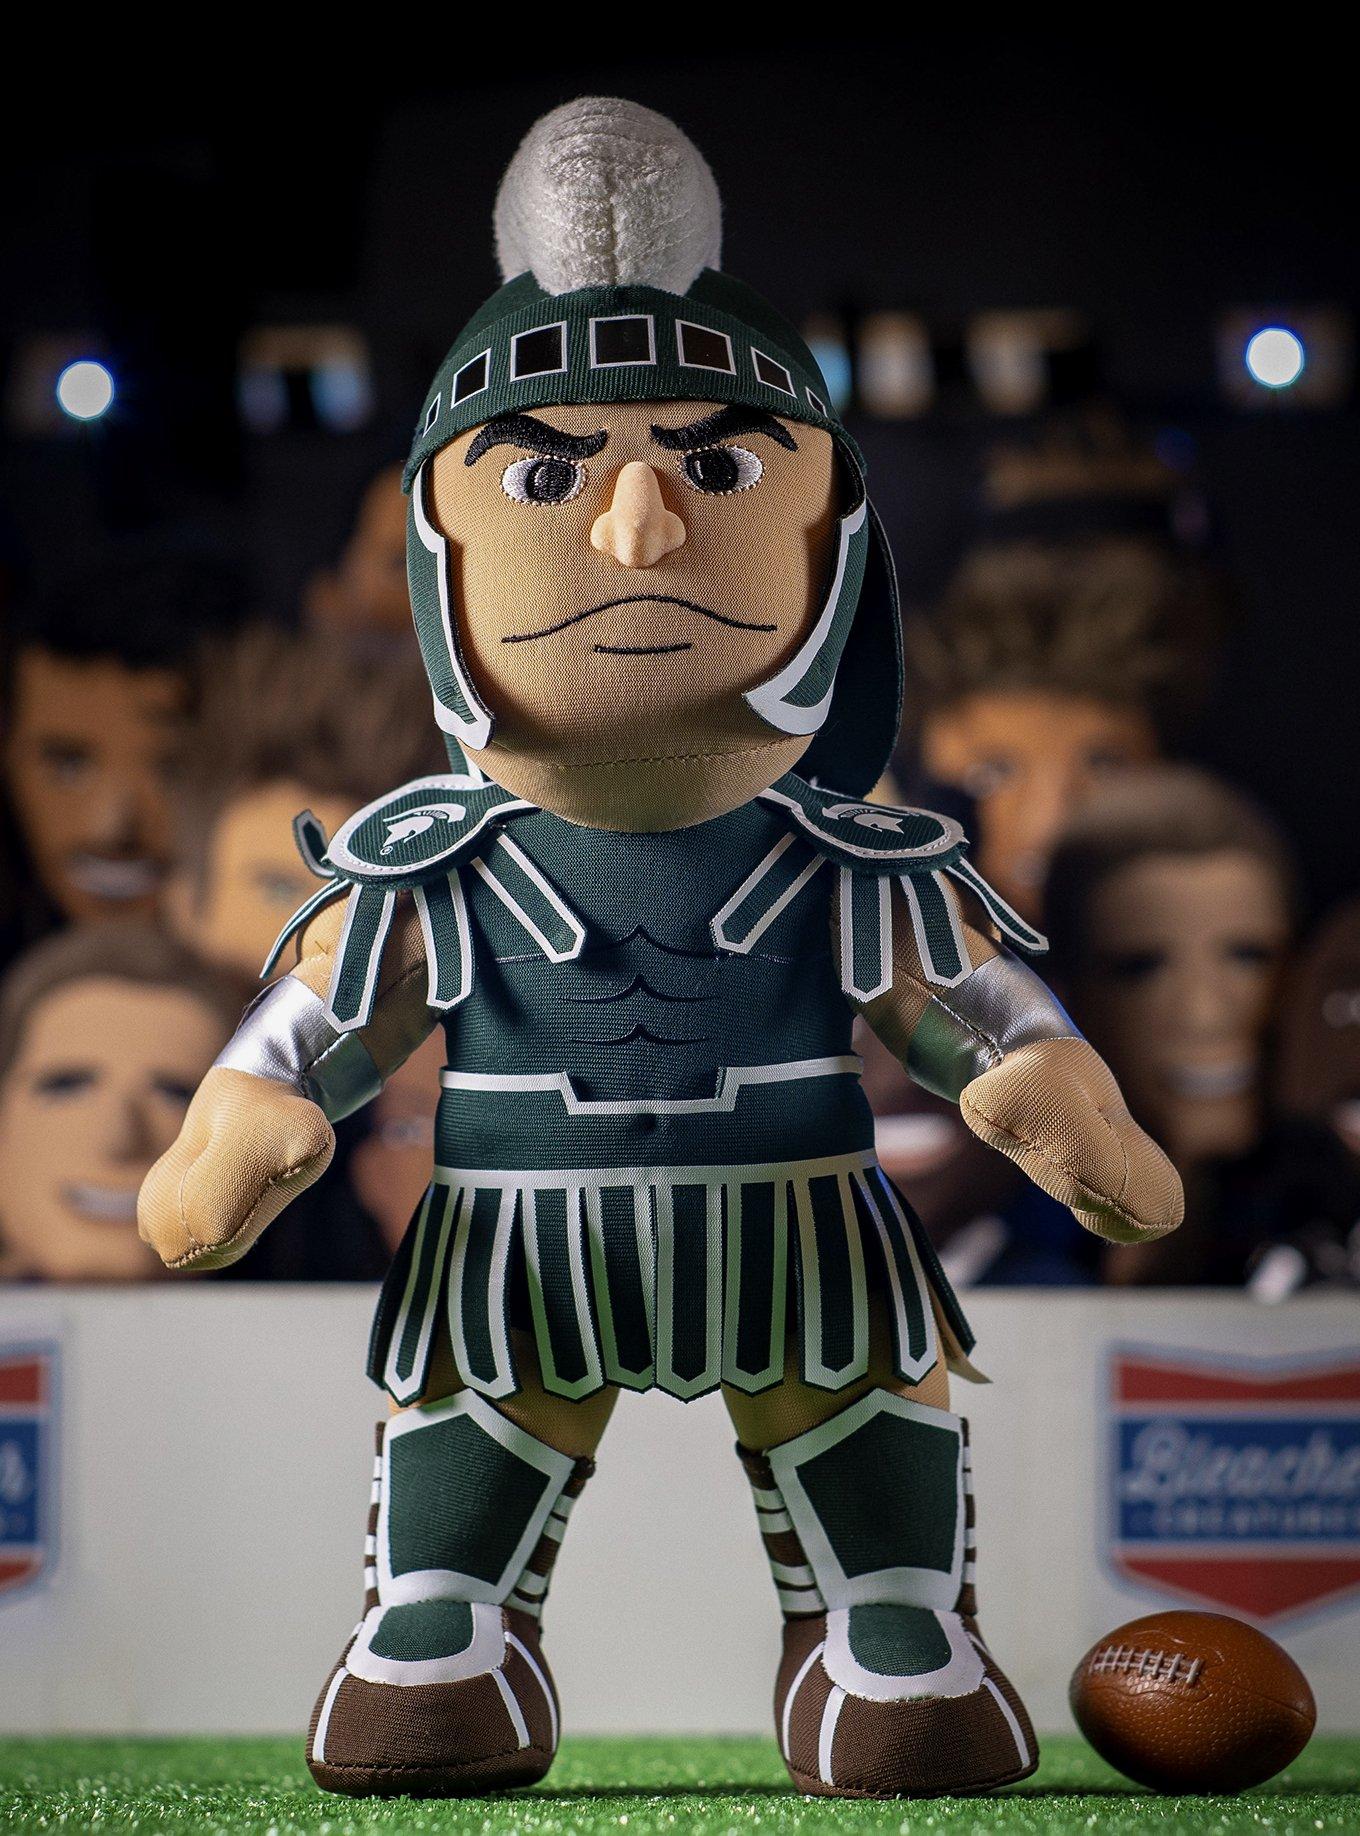 NCAA Michigan State Spartans Sparty 10" Bleacher Creatures Mascot Plush Figures